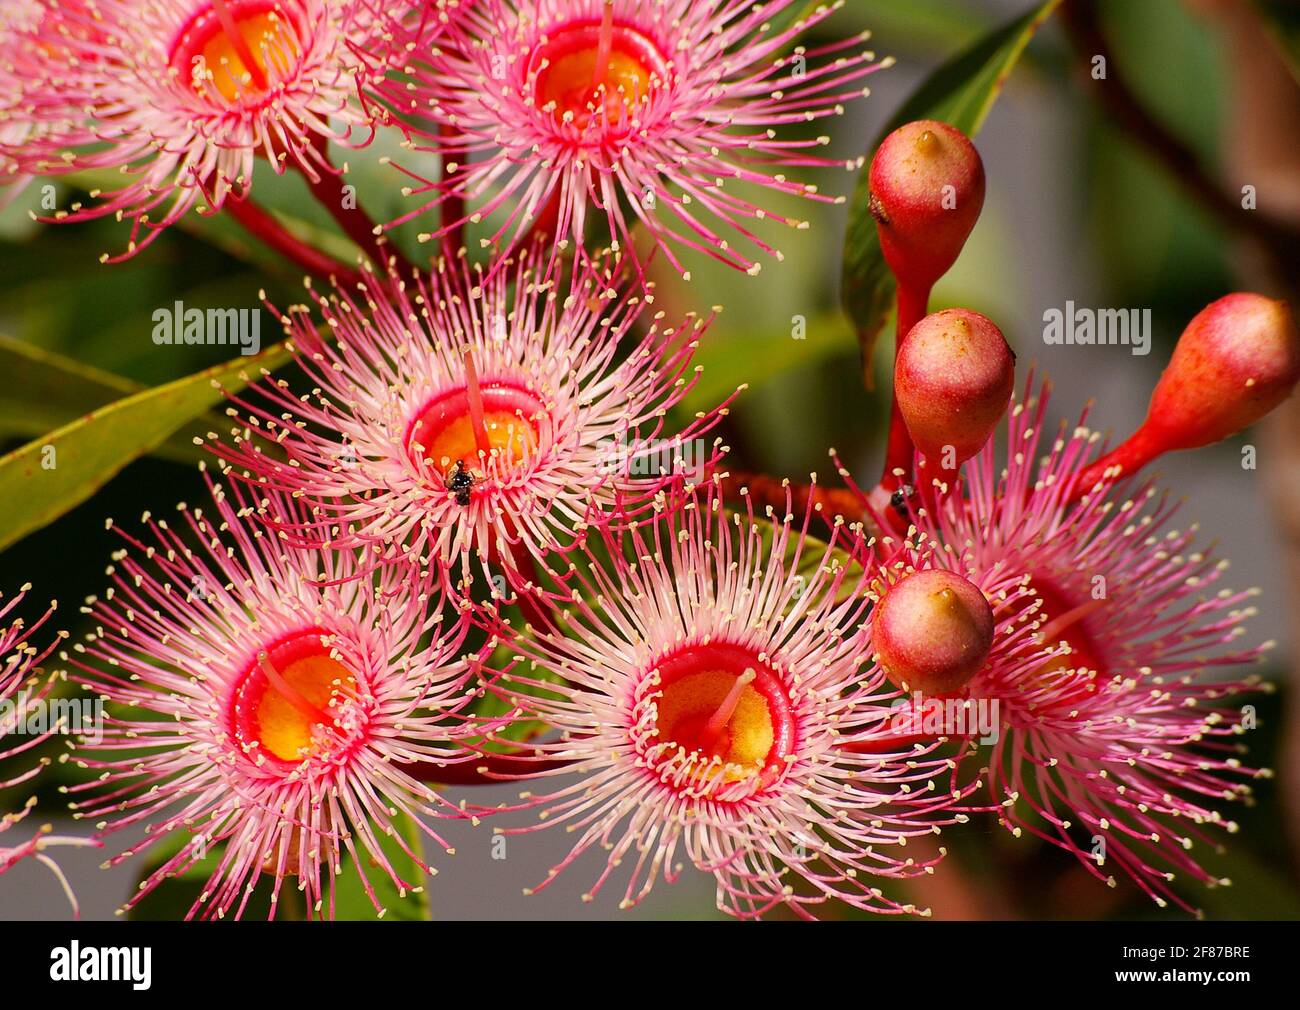 Pink Australian flowering gum tree blossom and buds, Corymbia